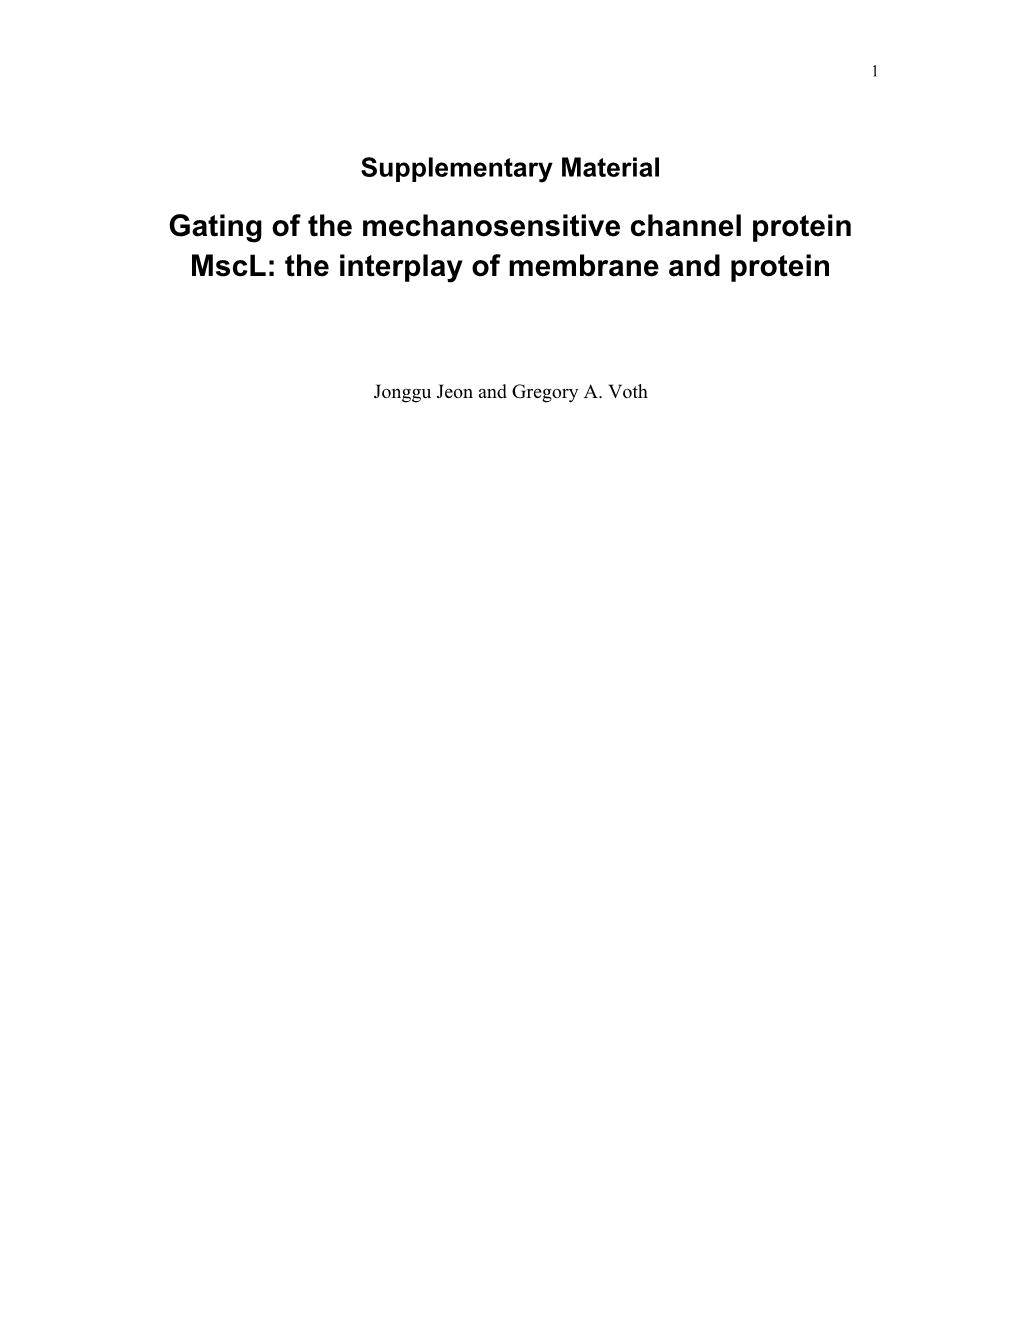 Gating of the Mechanosensitive Channel Protein Mscl: Protein-Induced Membrane Elasticity